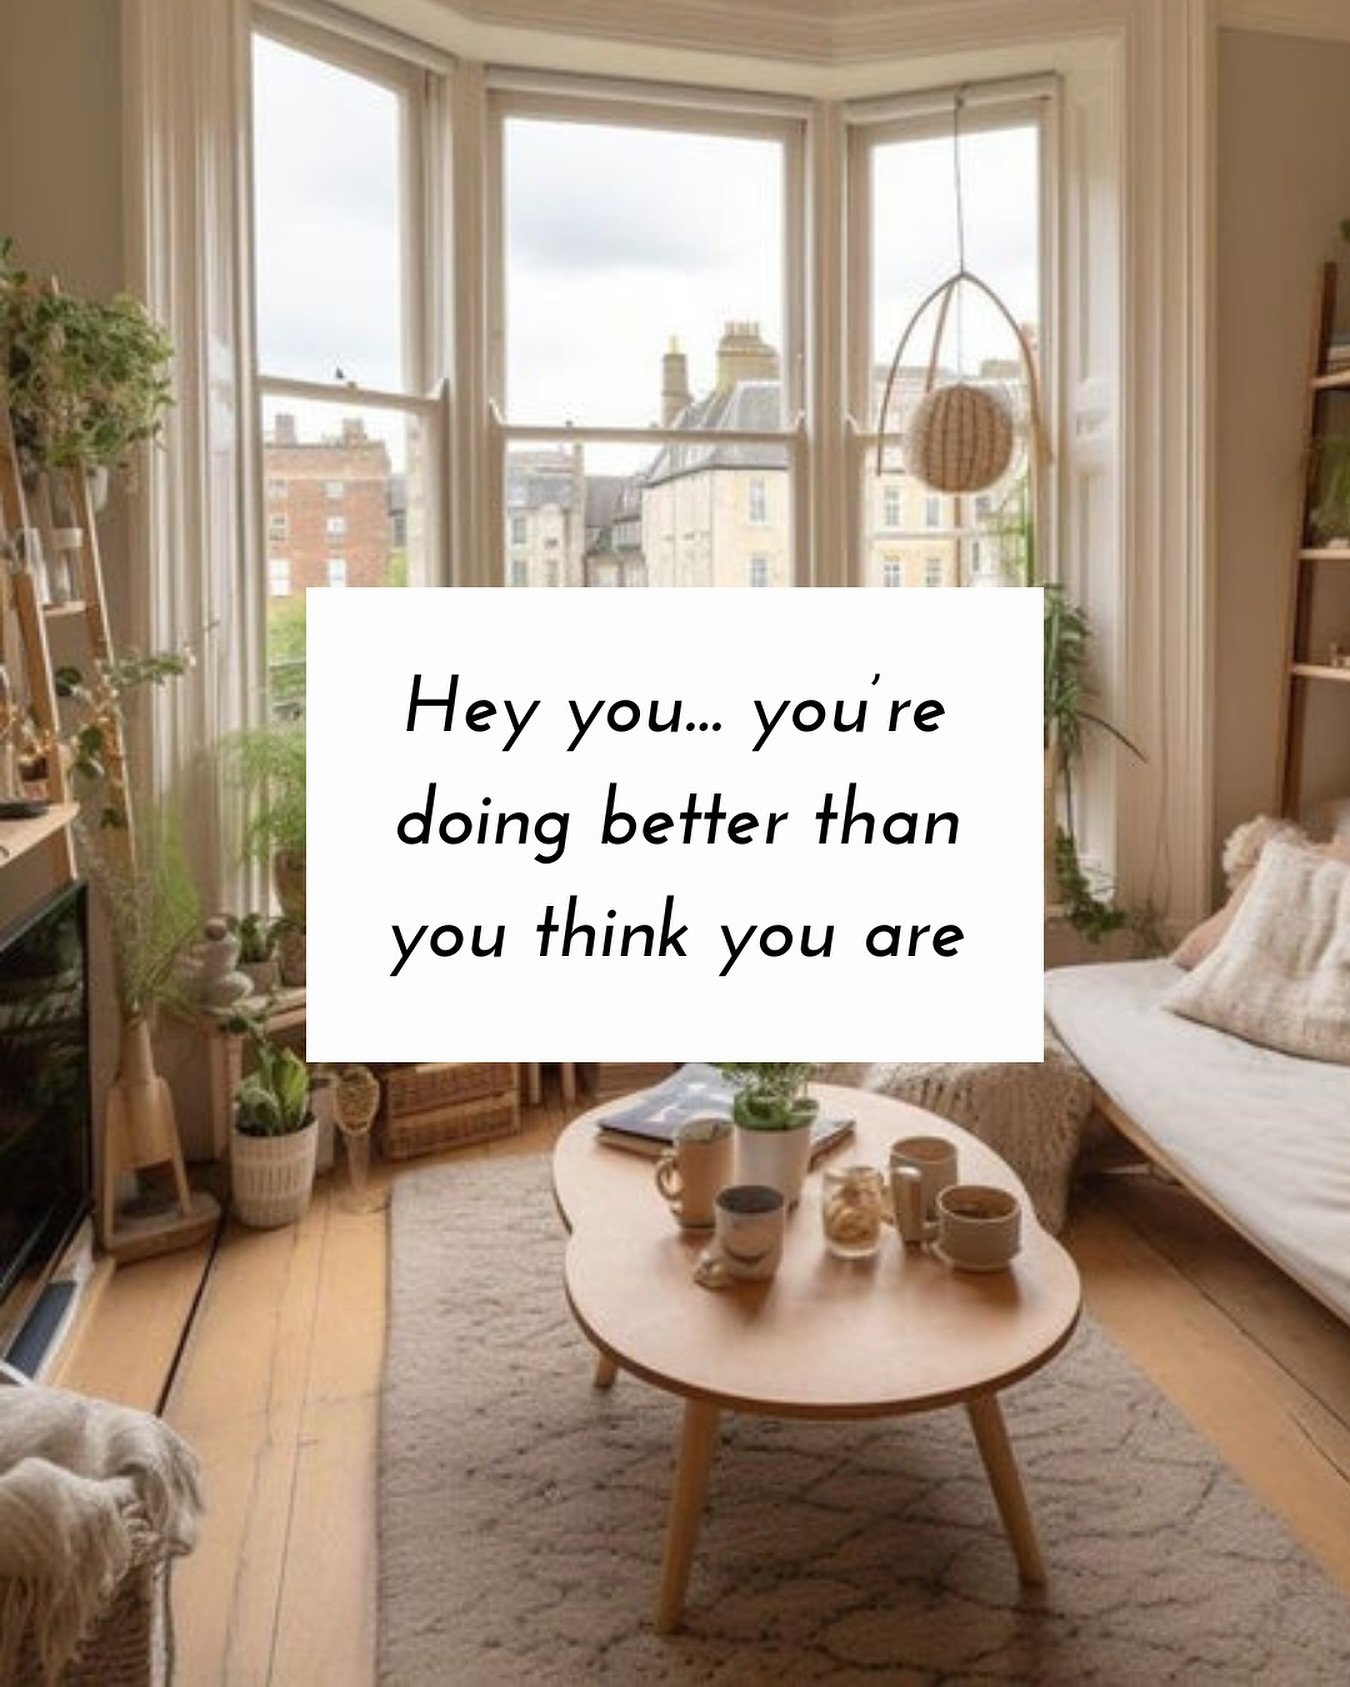 Hey friends, here is your reminder that you are doing better then you think you are 💜✨

Share this with a friend who needs to hear it 🩵

#mentalhealth #counselling #counsellor #therapy #therapist #mindfulness #strength #vulnerability #feelings #hap